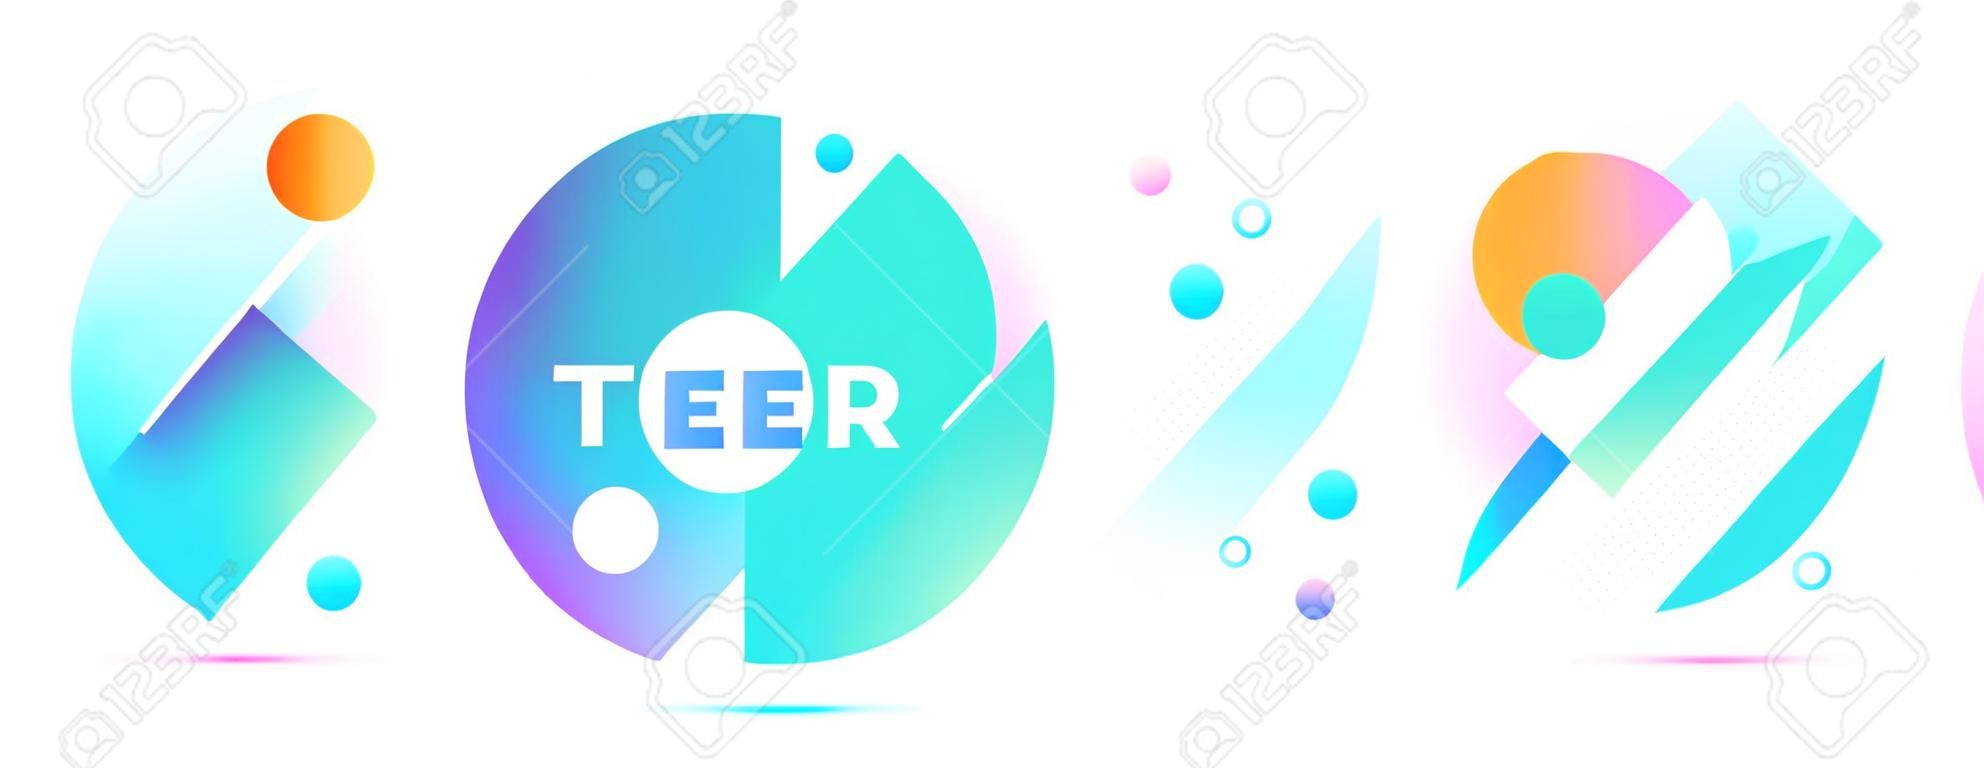 Abstract modern gradient banners. Design shapes. Vector layout template. Abstract background.